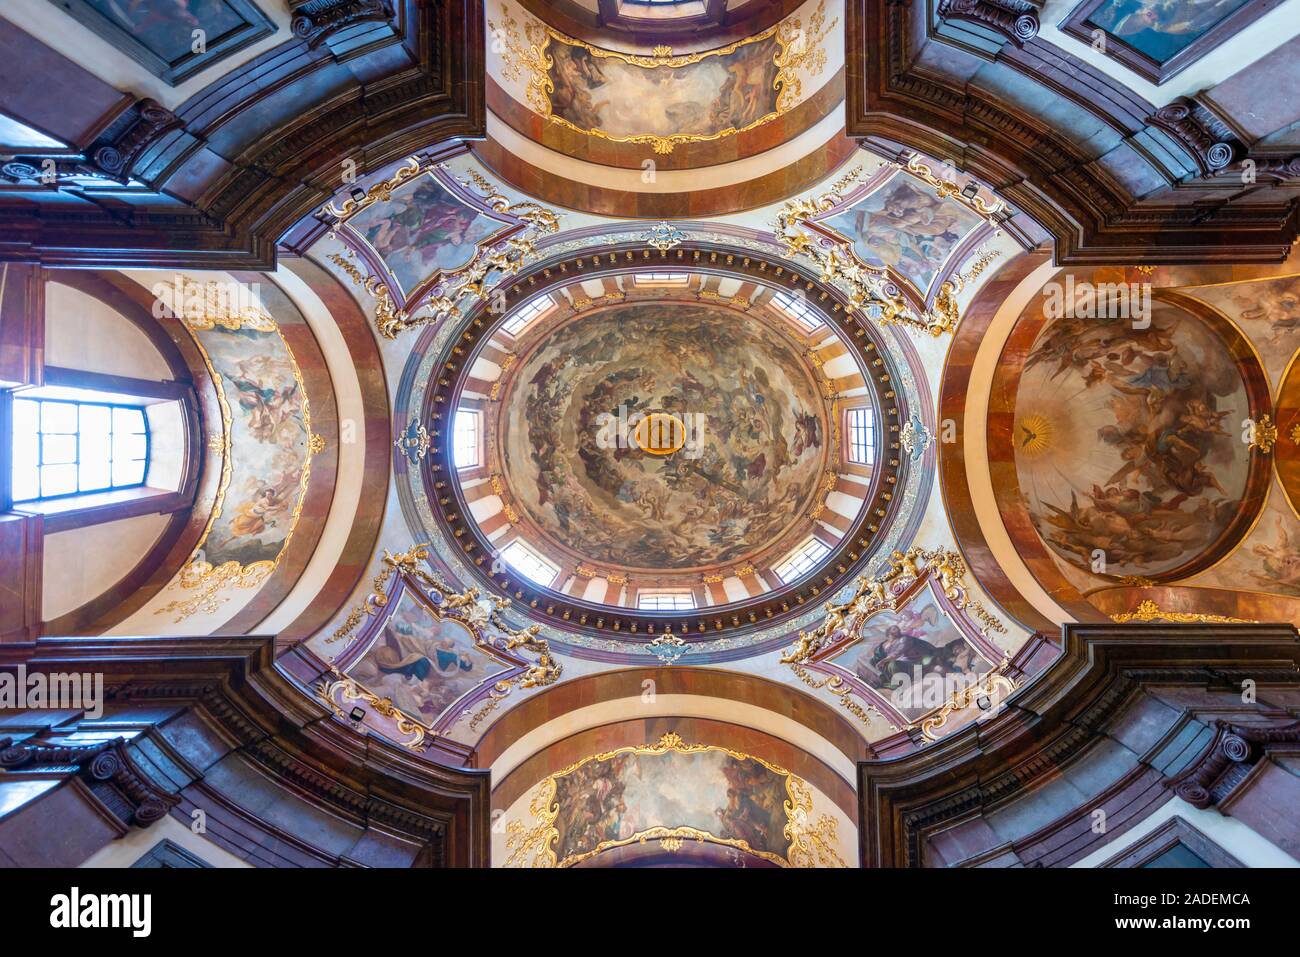 Church saint francis of assisi hi-res stock photography and images - Alamy